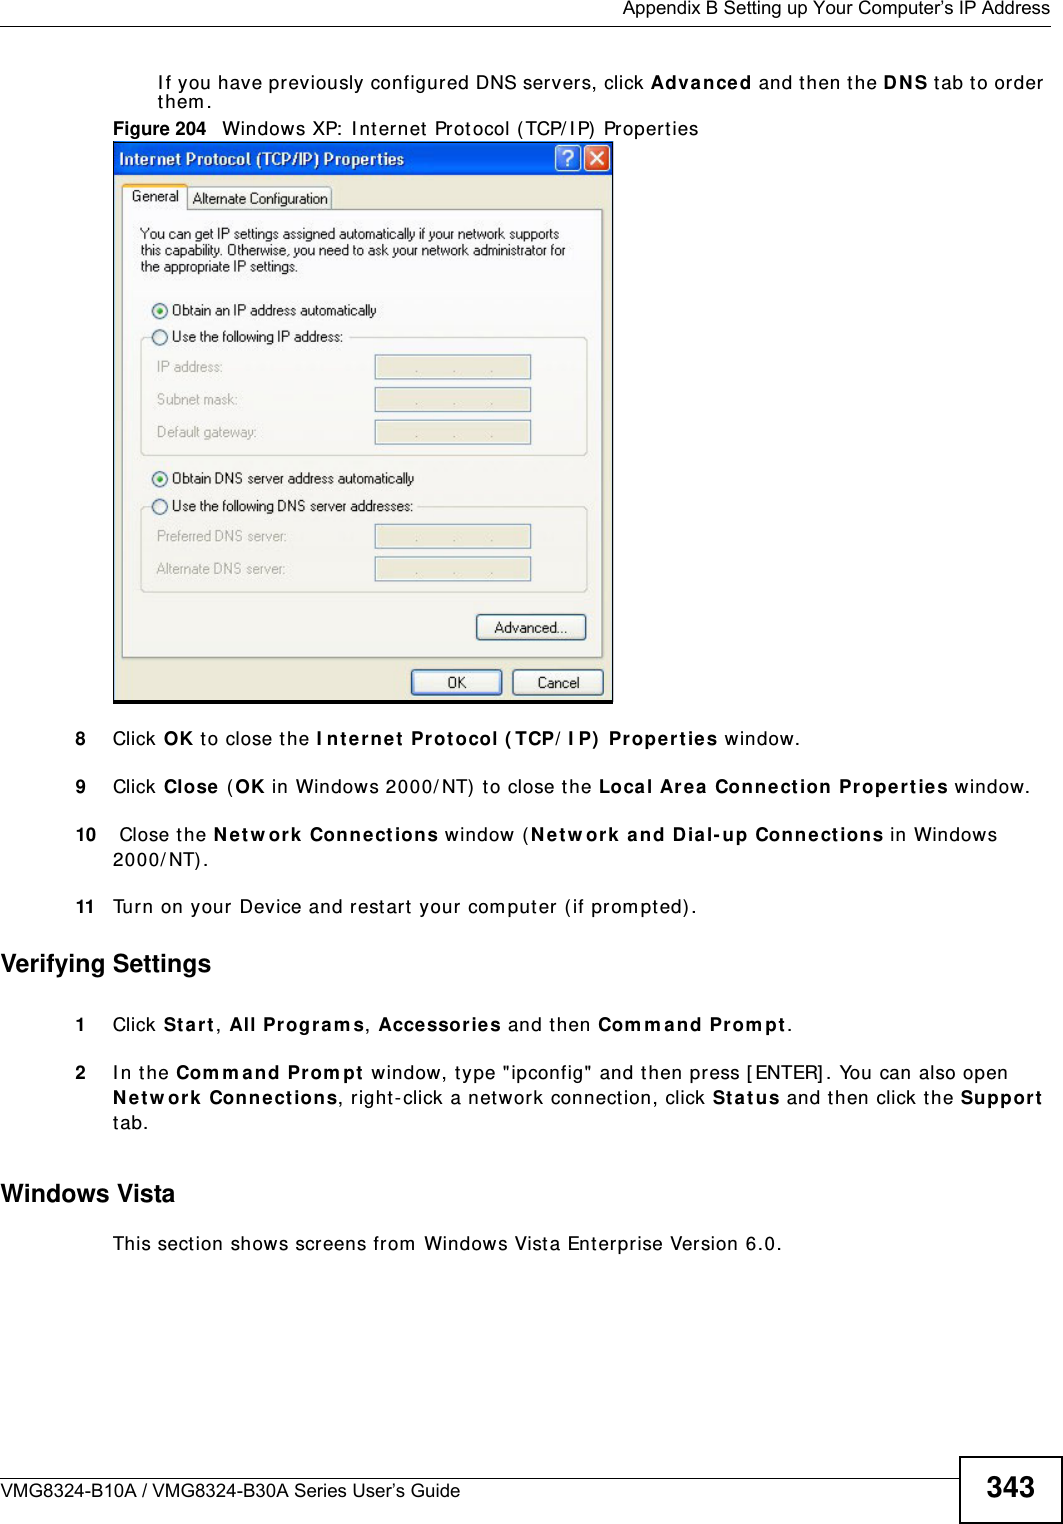  Appendix B Setting up Your Computer’s IP AddressVMG8324-B10A / VMG8324-B30A Series User’s Guide 343I f you have previously configured DNS servers, click Adva nce d and then the DN S t ab to order  t hem .Figure 204   Windows XP:  I nt ernet  Prot ocol ( TCP/ I P)  Propert ies8Click OK t o close t he I nte rnet  Prot ocol ( TCP/ I P)  Propert ies window.9Click Close  ( OK in Windows 2000/ NT)  t o close the Loca l Area  Connection  Pr oper ties window.10  Close t he Ne tw ork  Connect ions window  ( Ne tw ork  a nd Dial- up Con nections in Windows 200 0/ NT) .11 Turn on your Device and rest art your com put er ( if prom pted).Verifying Settings1Click St a r t , All Program s, Accessor ies and then Com m a nd Pr om pt.2I n t he Com m and Prom pt  window, t ype &quot;ipconfig&quot; and t hen press [ ENTER] . You can also open N etw or k Conne ct ions, right- click a net work connection, click St a t u s and then click the Support  tab.Windows VistaThis section shows screens from  Windows Vista Enterprise Version 6.0.